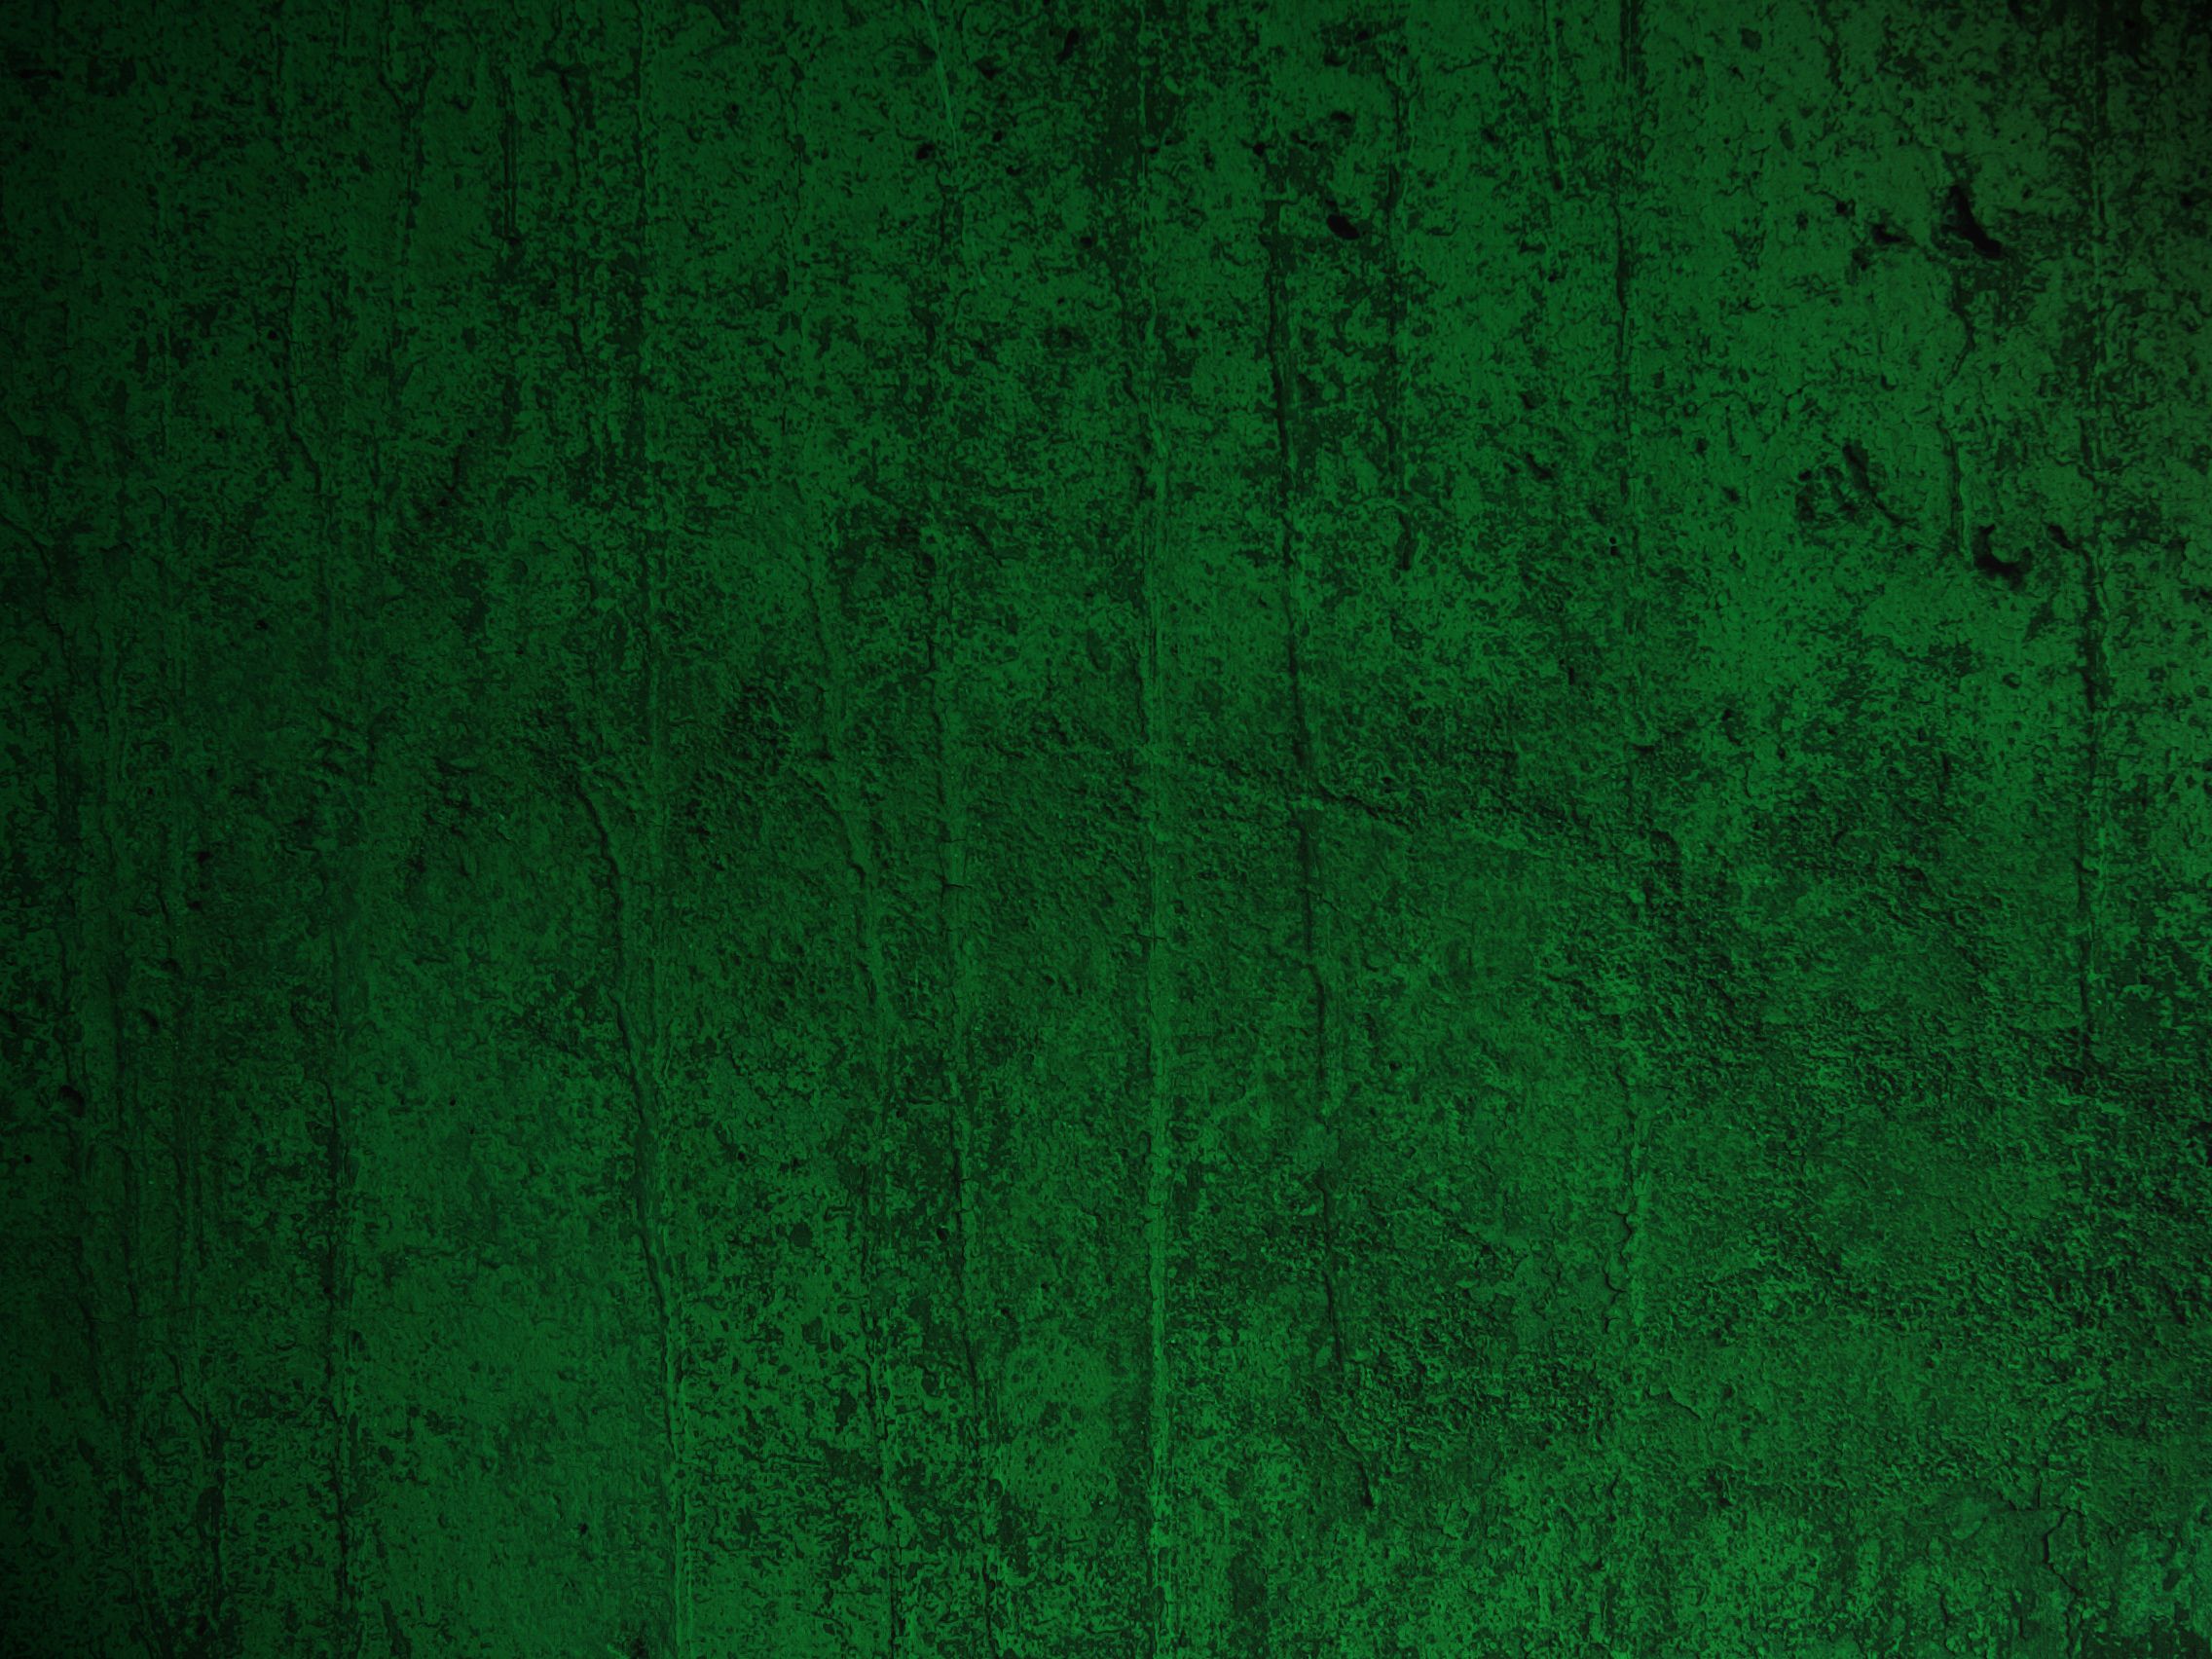 Green Texture Photos Download The BEST Free Green Texture Stock Photos   HD Images